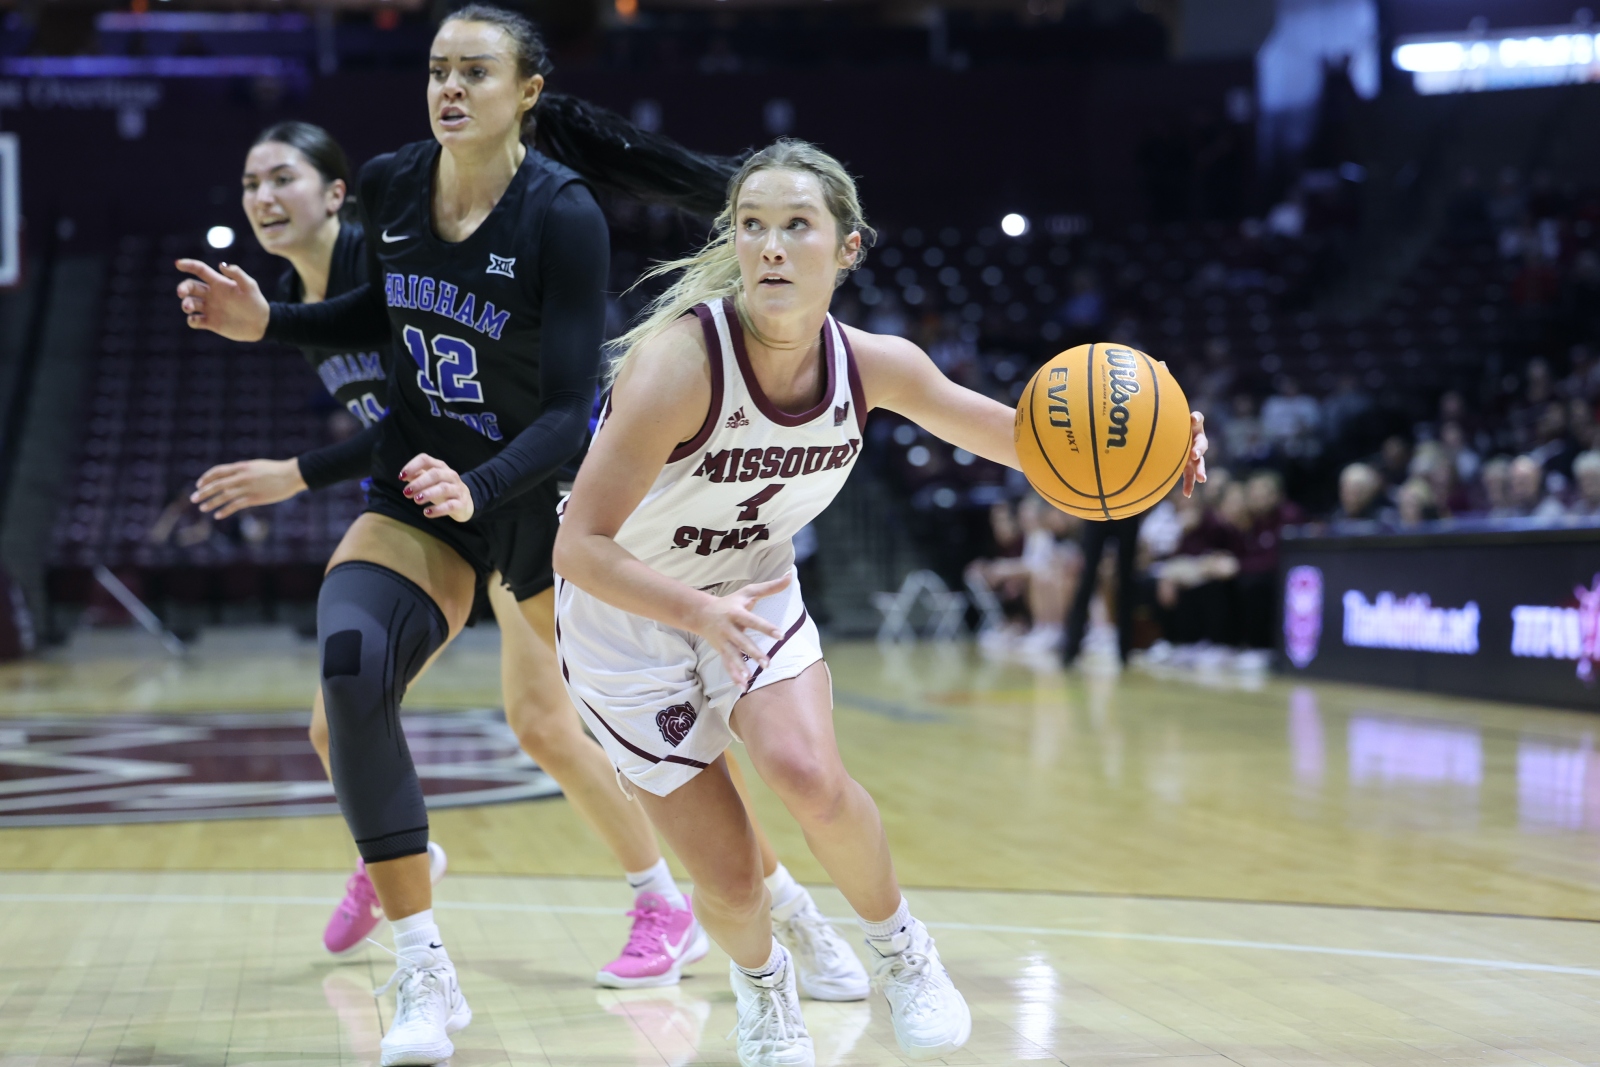 Lacy Stokes, wearing a Missouri State Lady Bears uniform, dribbles toward the basket during a game at Great Southern Bank Arena in Springfield, Missouri.